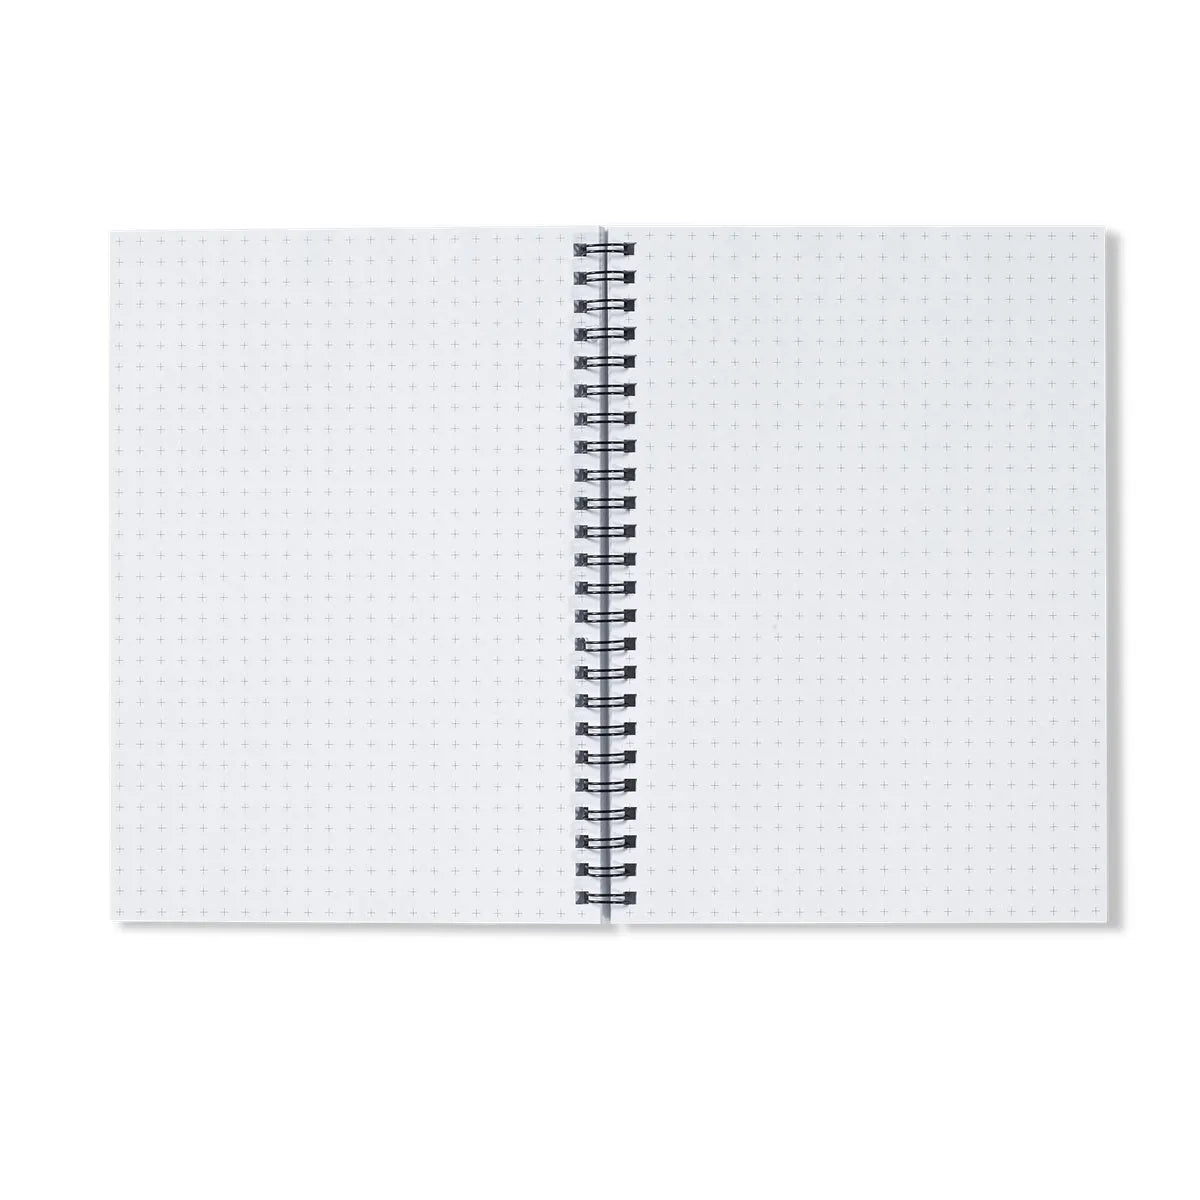 Layer Cake Notebook - Notebooks & Notepads - Aesthetic Art